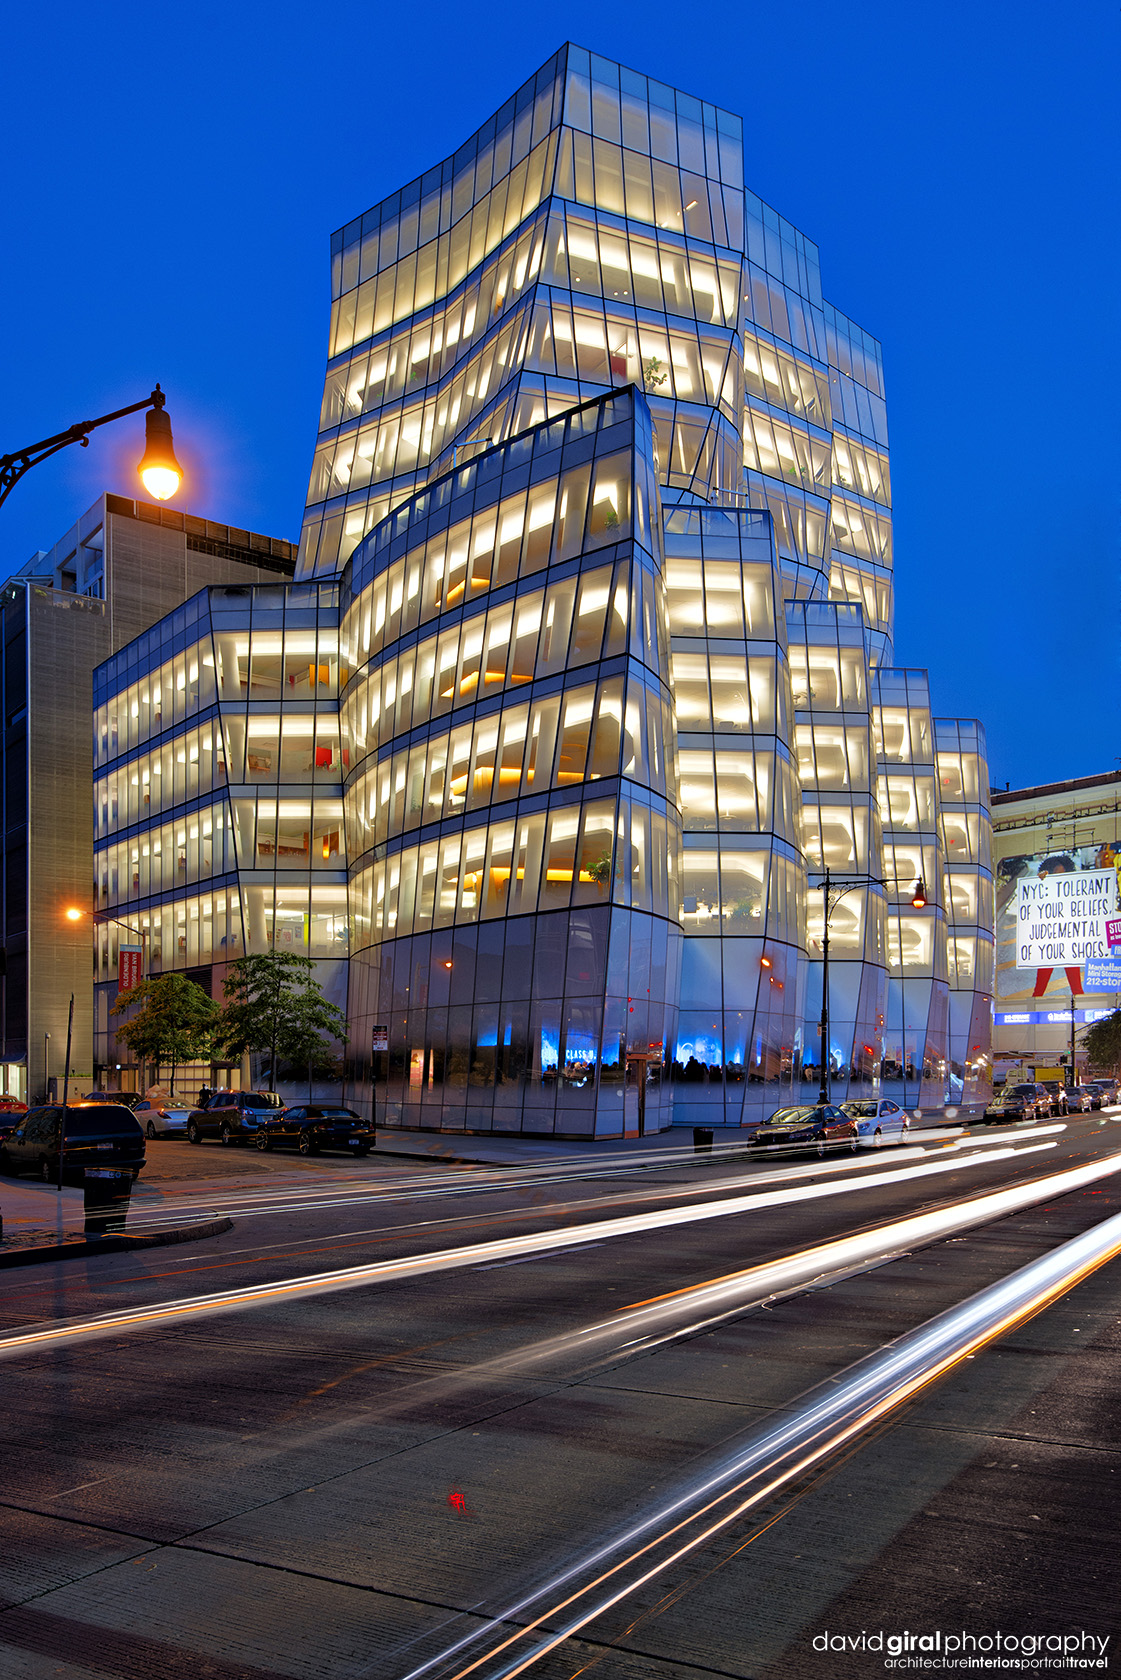 Rush hour at IAC Building by architect Frank Ghery Nikon D800 + Nikkor 16-35mm F/4.0 G VRII @ 17mm | ISO100 - 10s - F/13.0